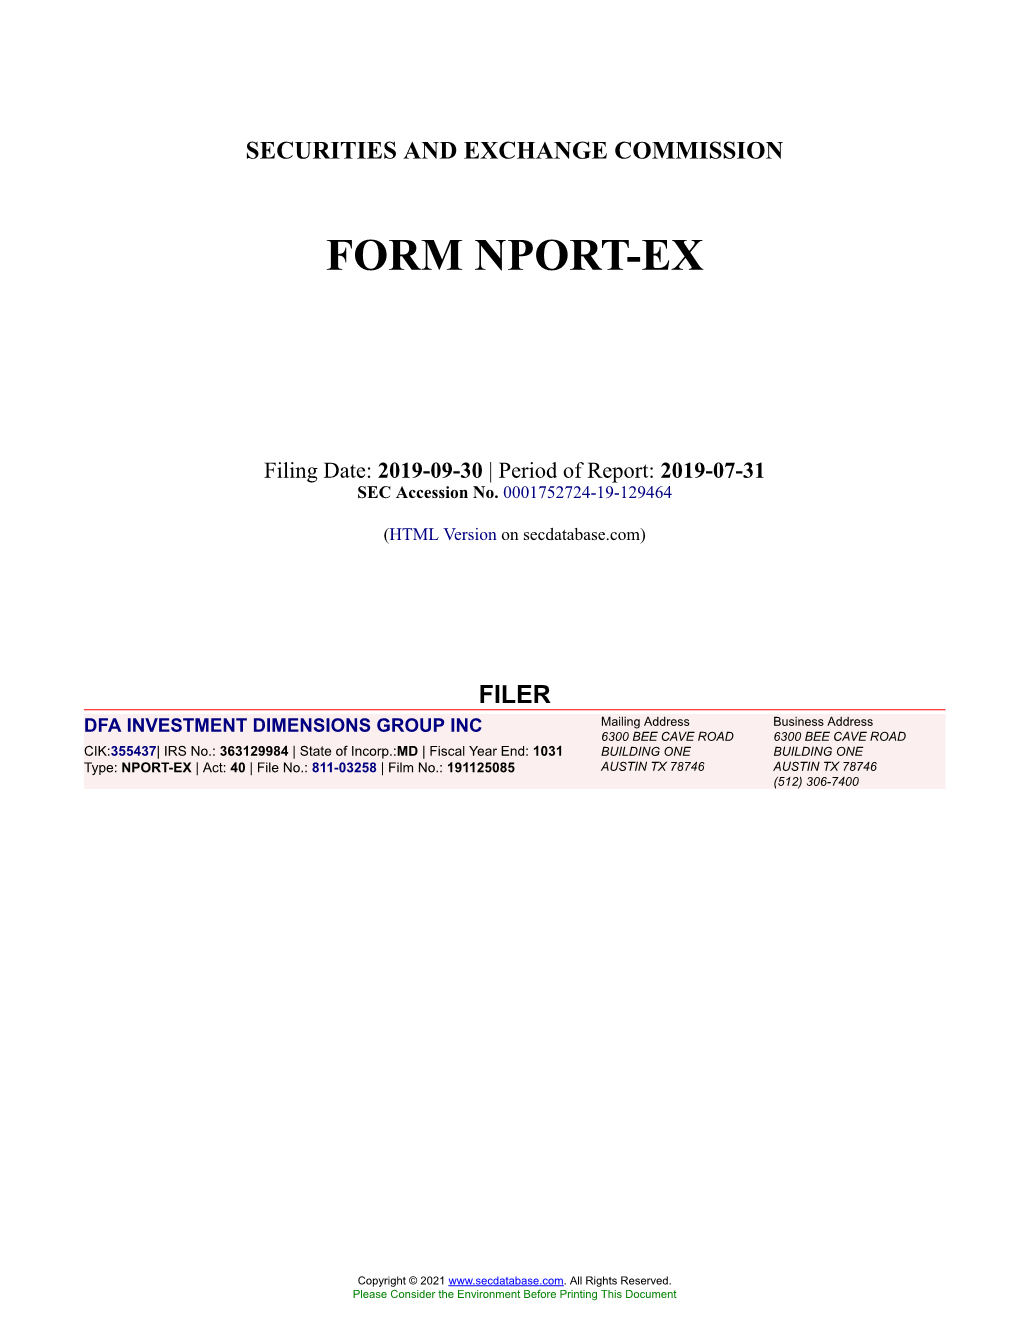 DFA INVESTMENT DIMENSIONS GROUP INC Form NPORT-EX Filed